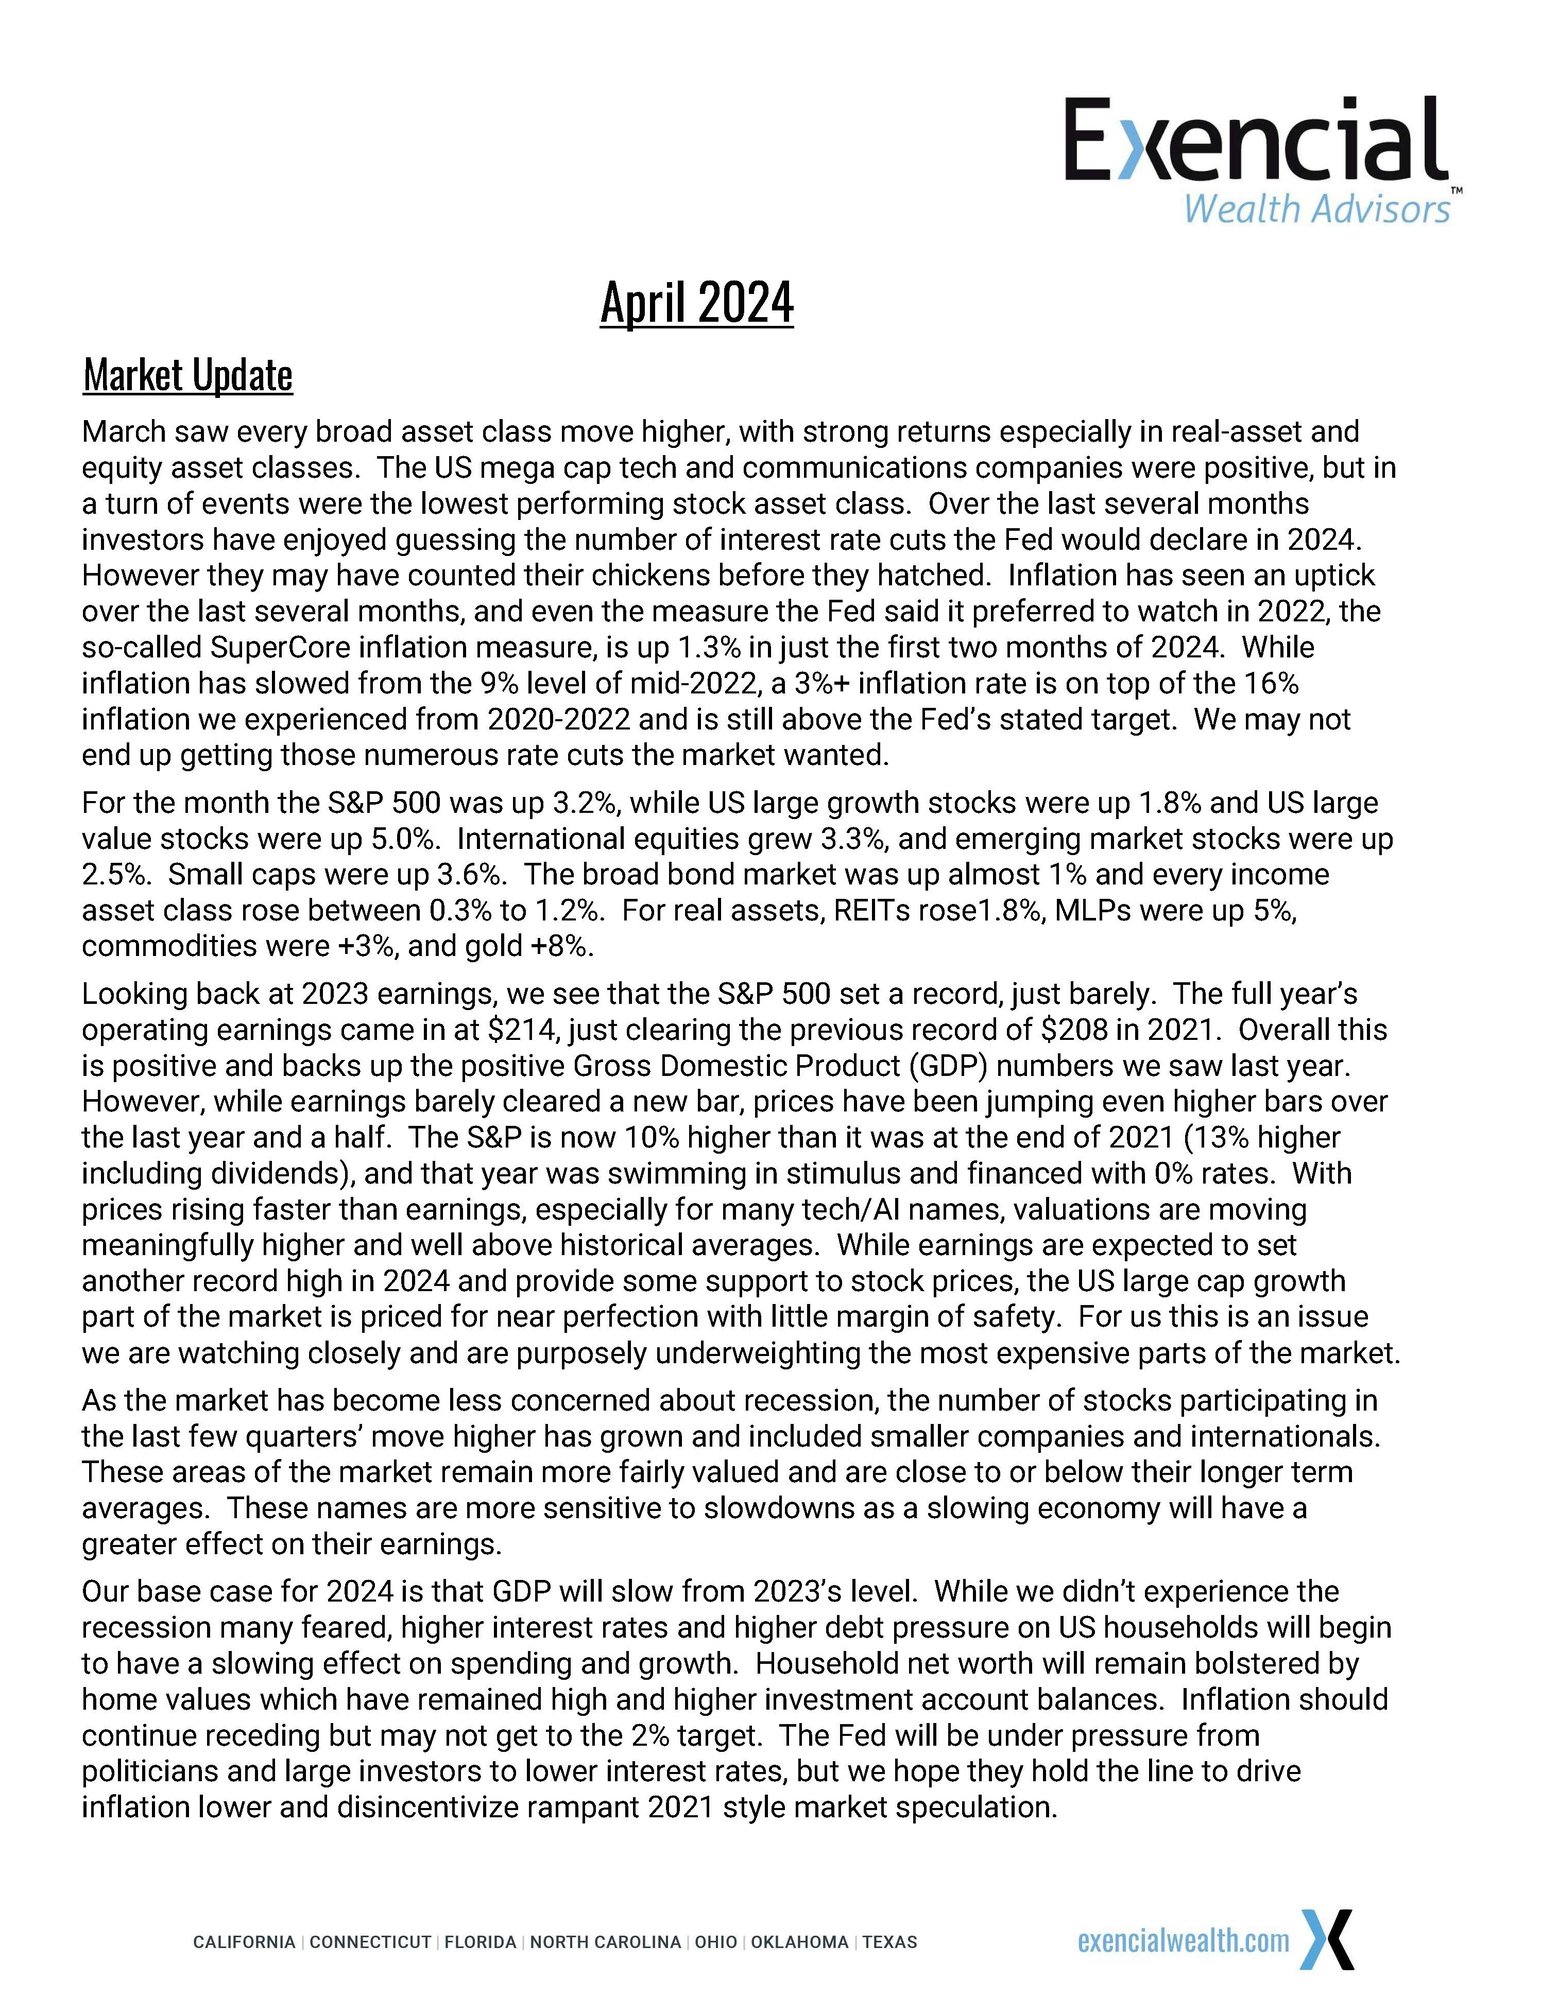 April 2024 Quarterly Market & Strategy Commentary_Page_1